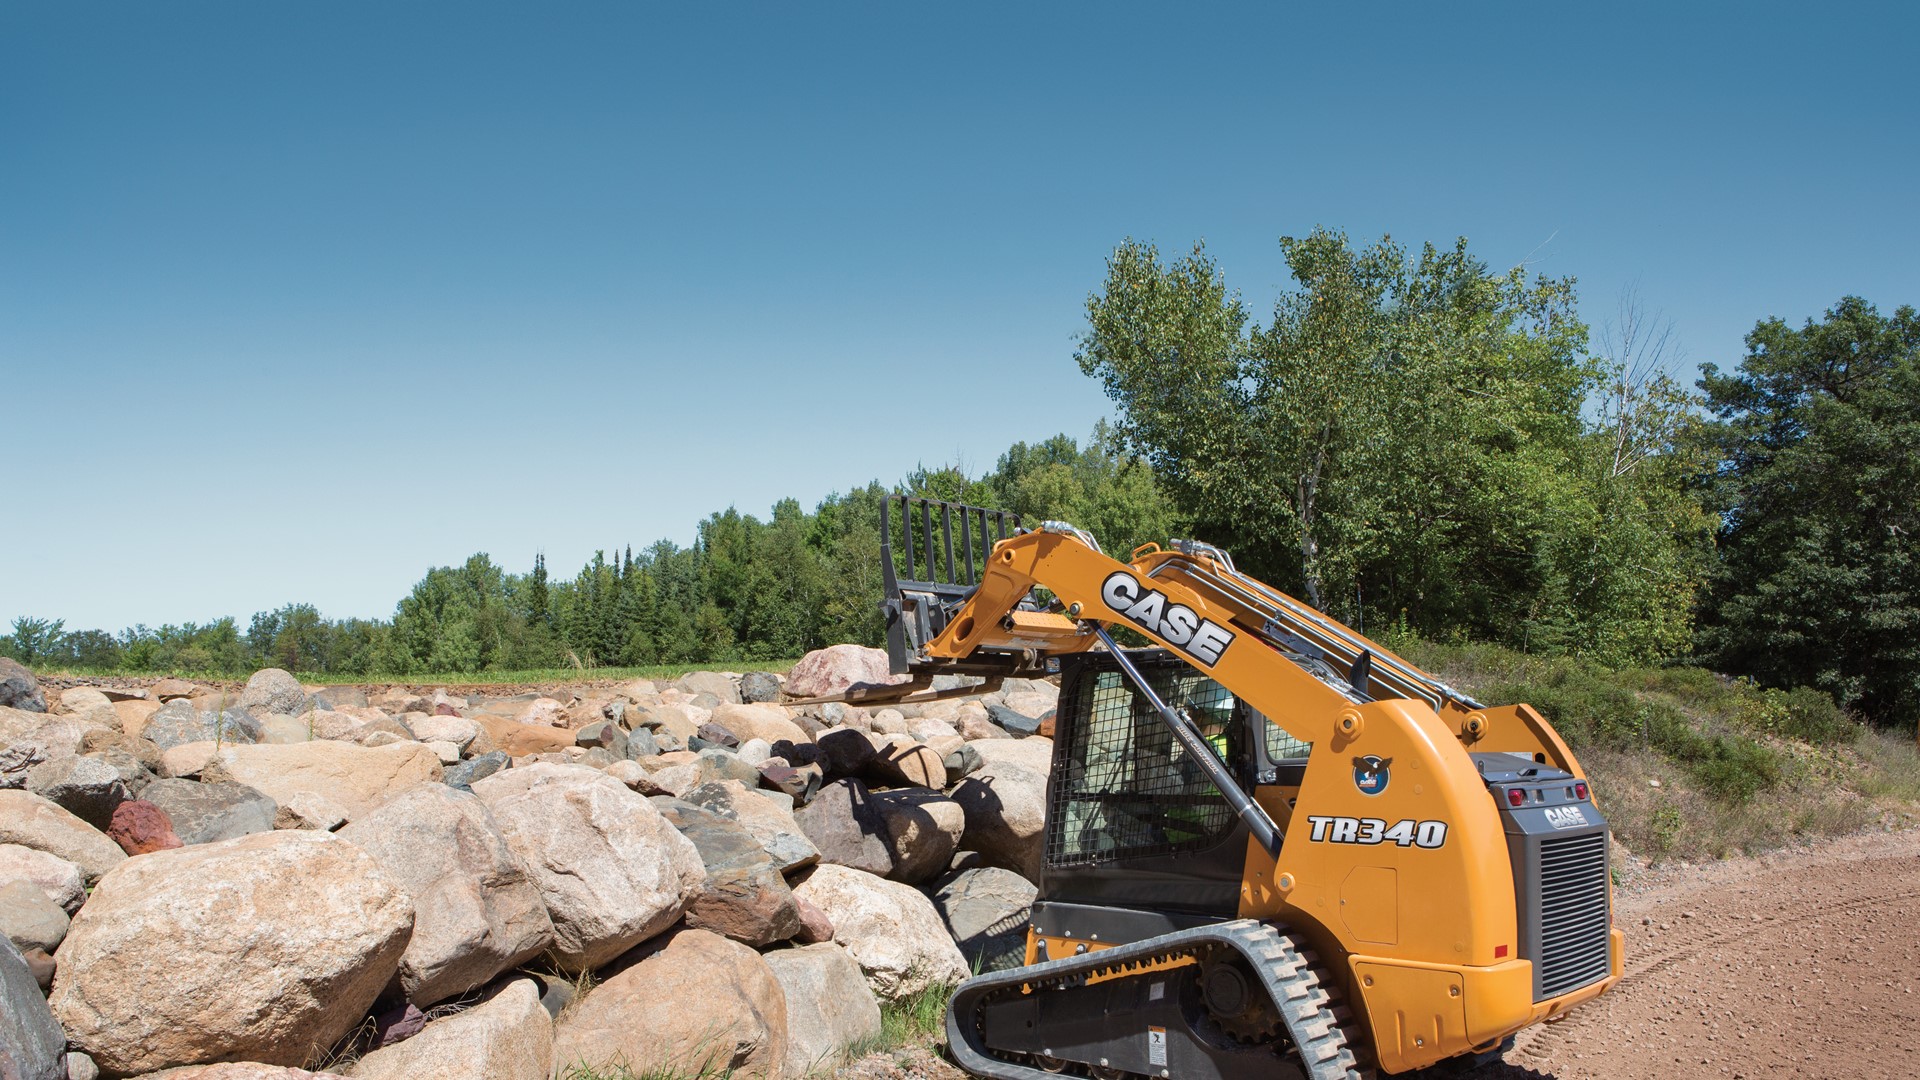 CASE TR340 Compact Track Loader Named to Top 50 New Products for 2016